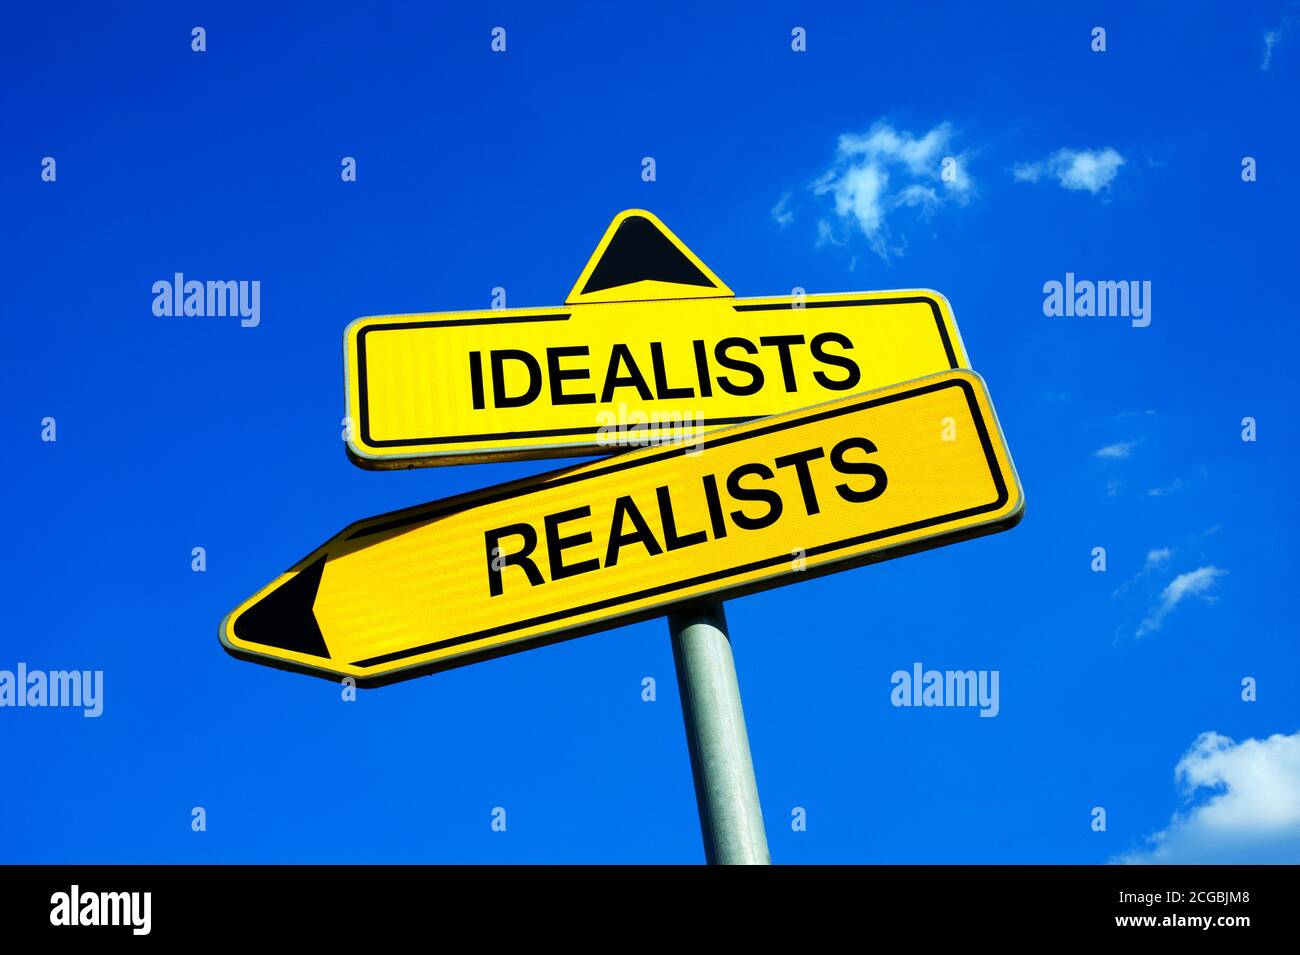 Idealists vs Realists - Traffic sign with two options - optimist attitude to theory, visionary and dreams or sceptic pessimism and pragmatism. Danger Stock Photo